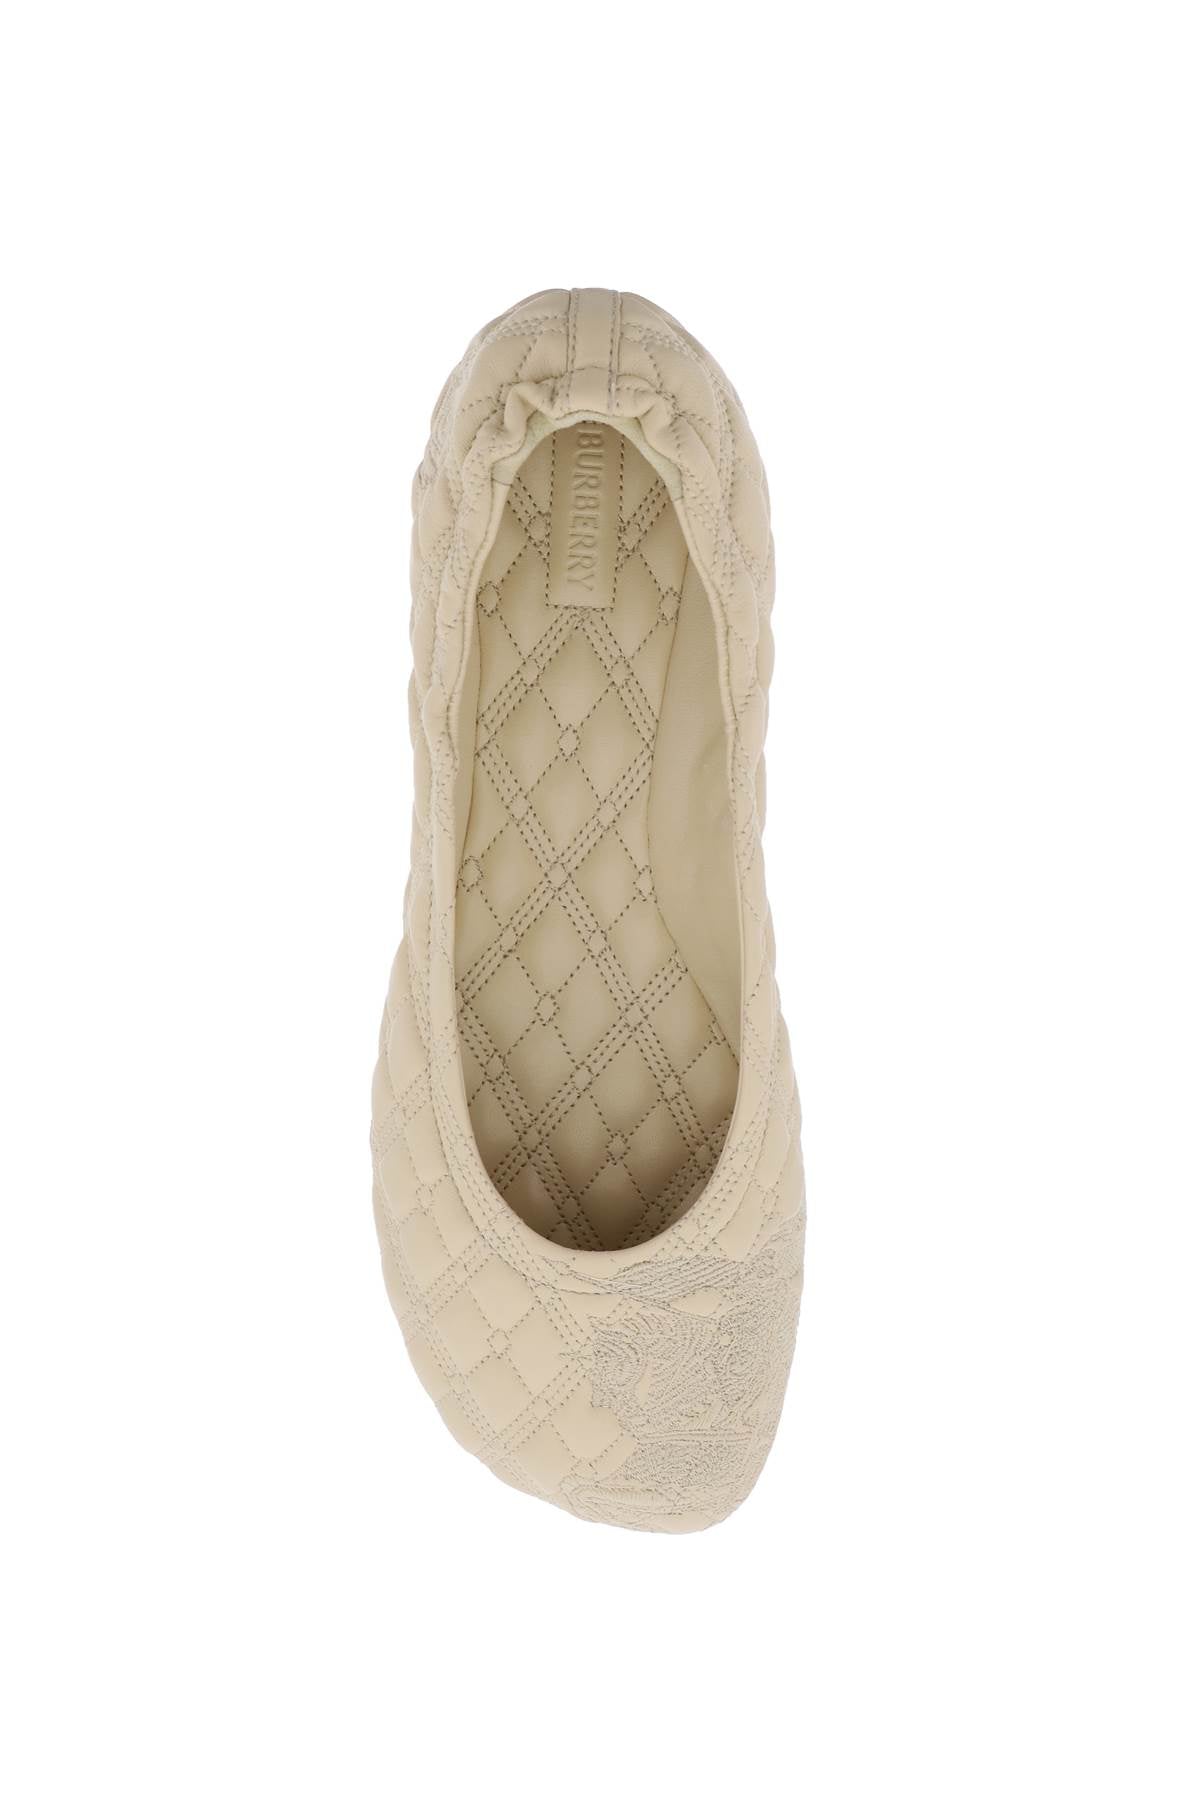 Burberry Burberry quilted leather sadler ballet flats